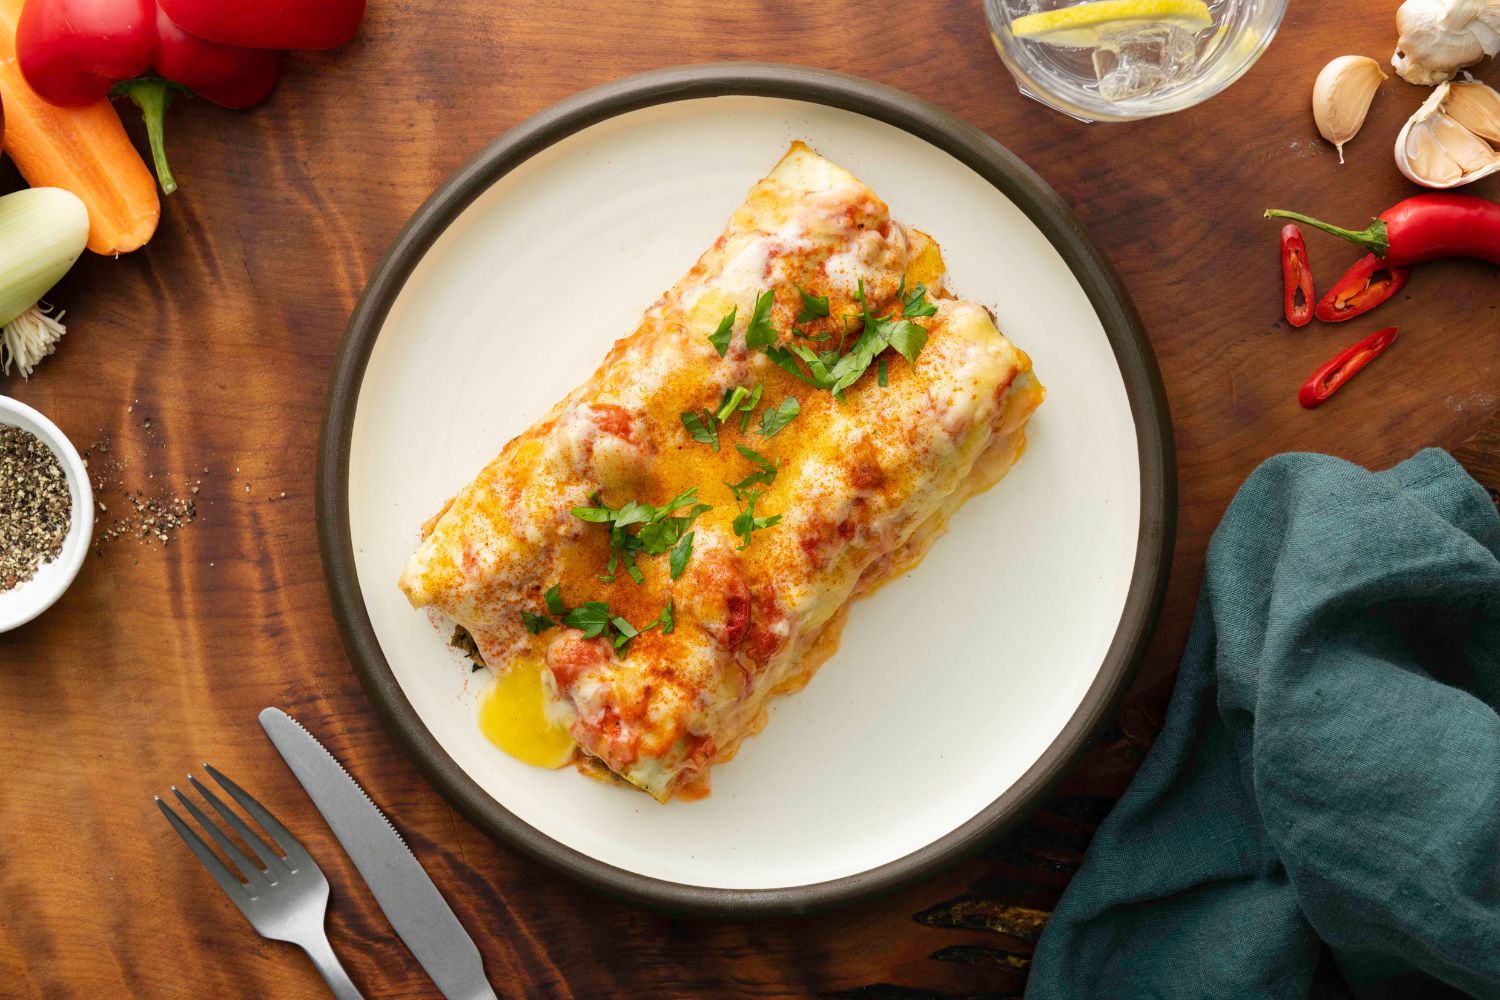 Beef and spinach cannelloni